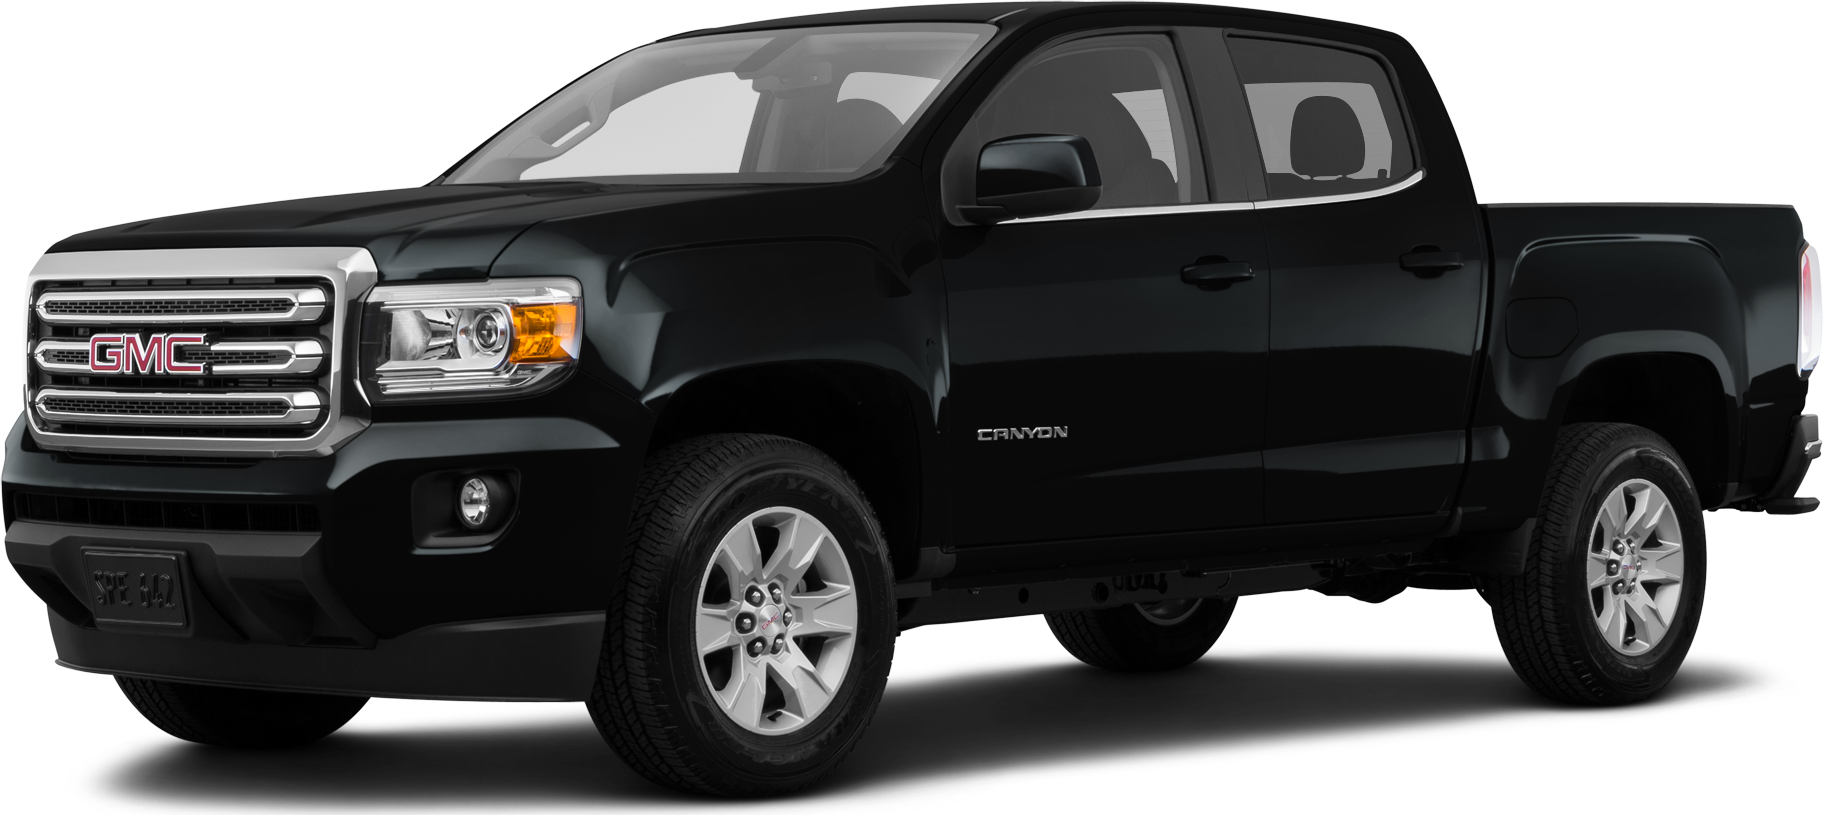 2015 GMC Canyon Crew Cab Price, Value, Ratings & Reviews | Kelley